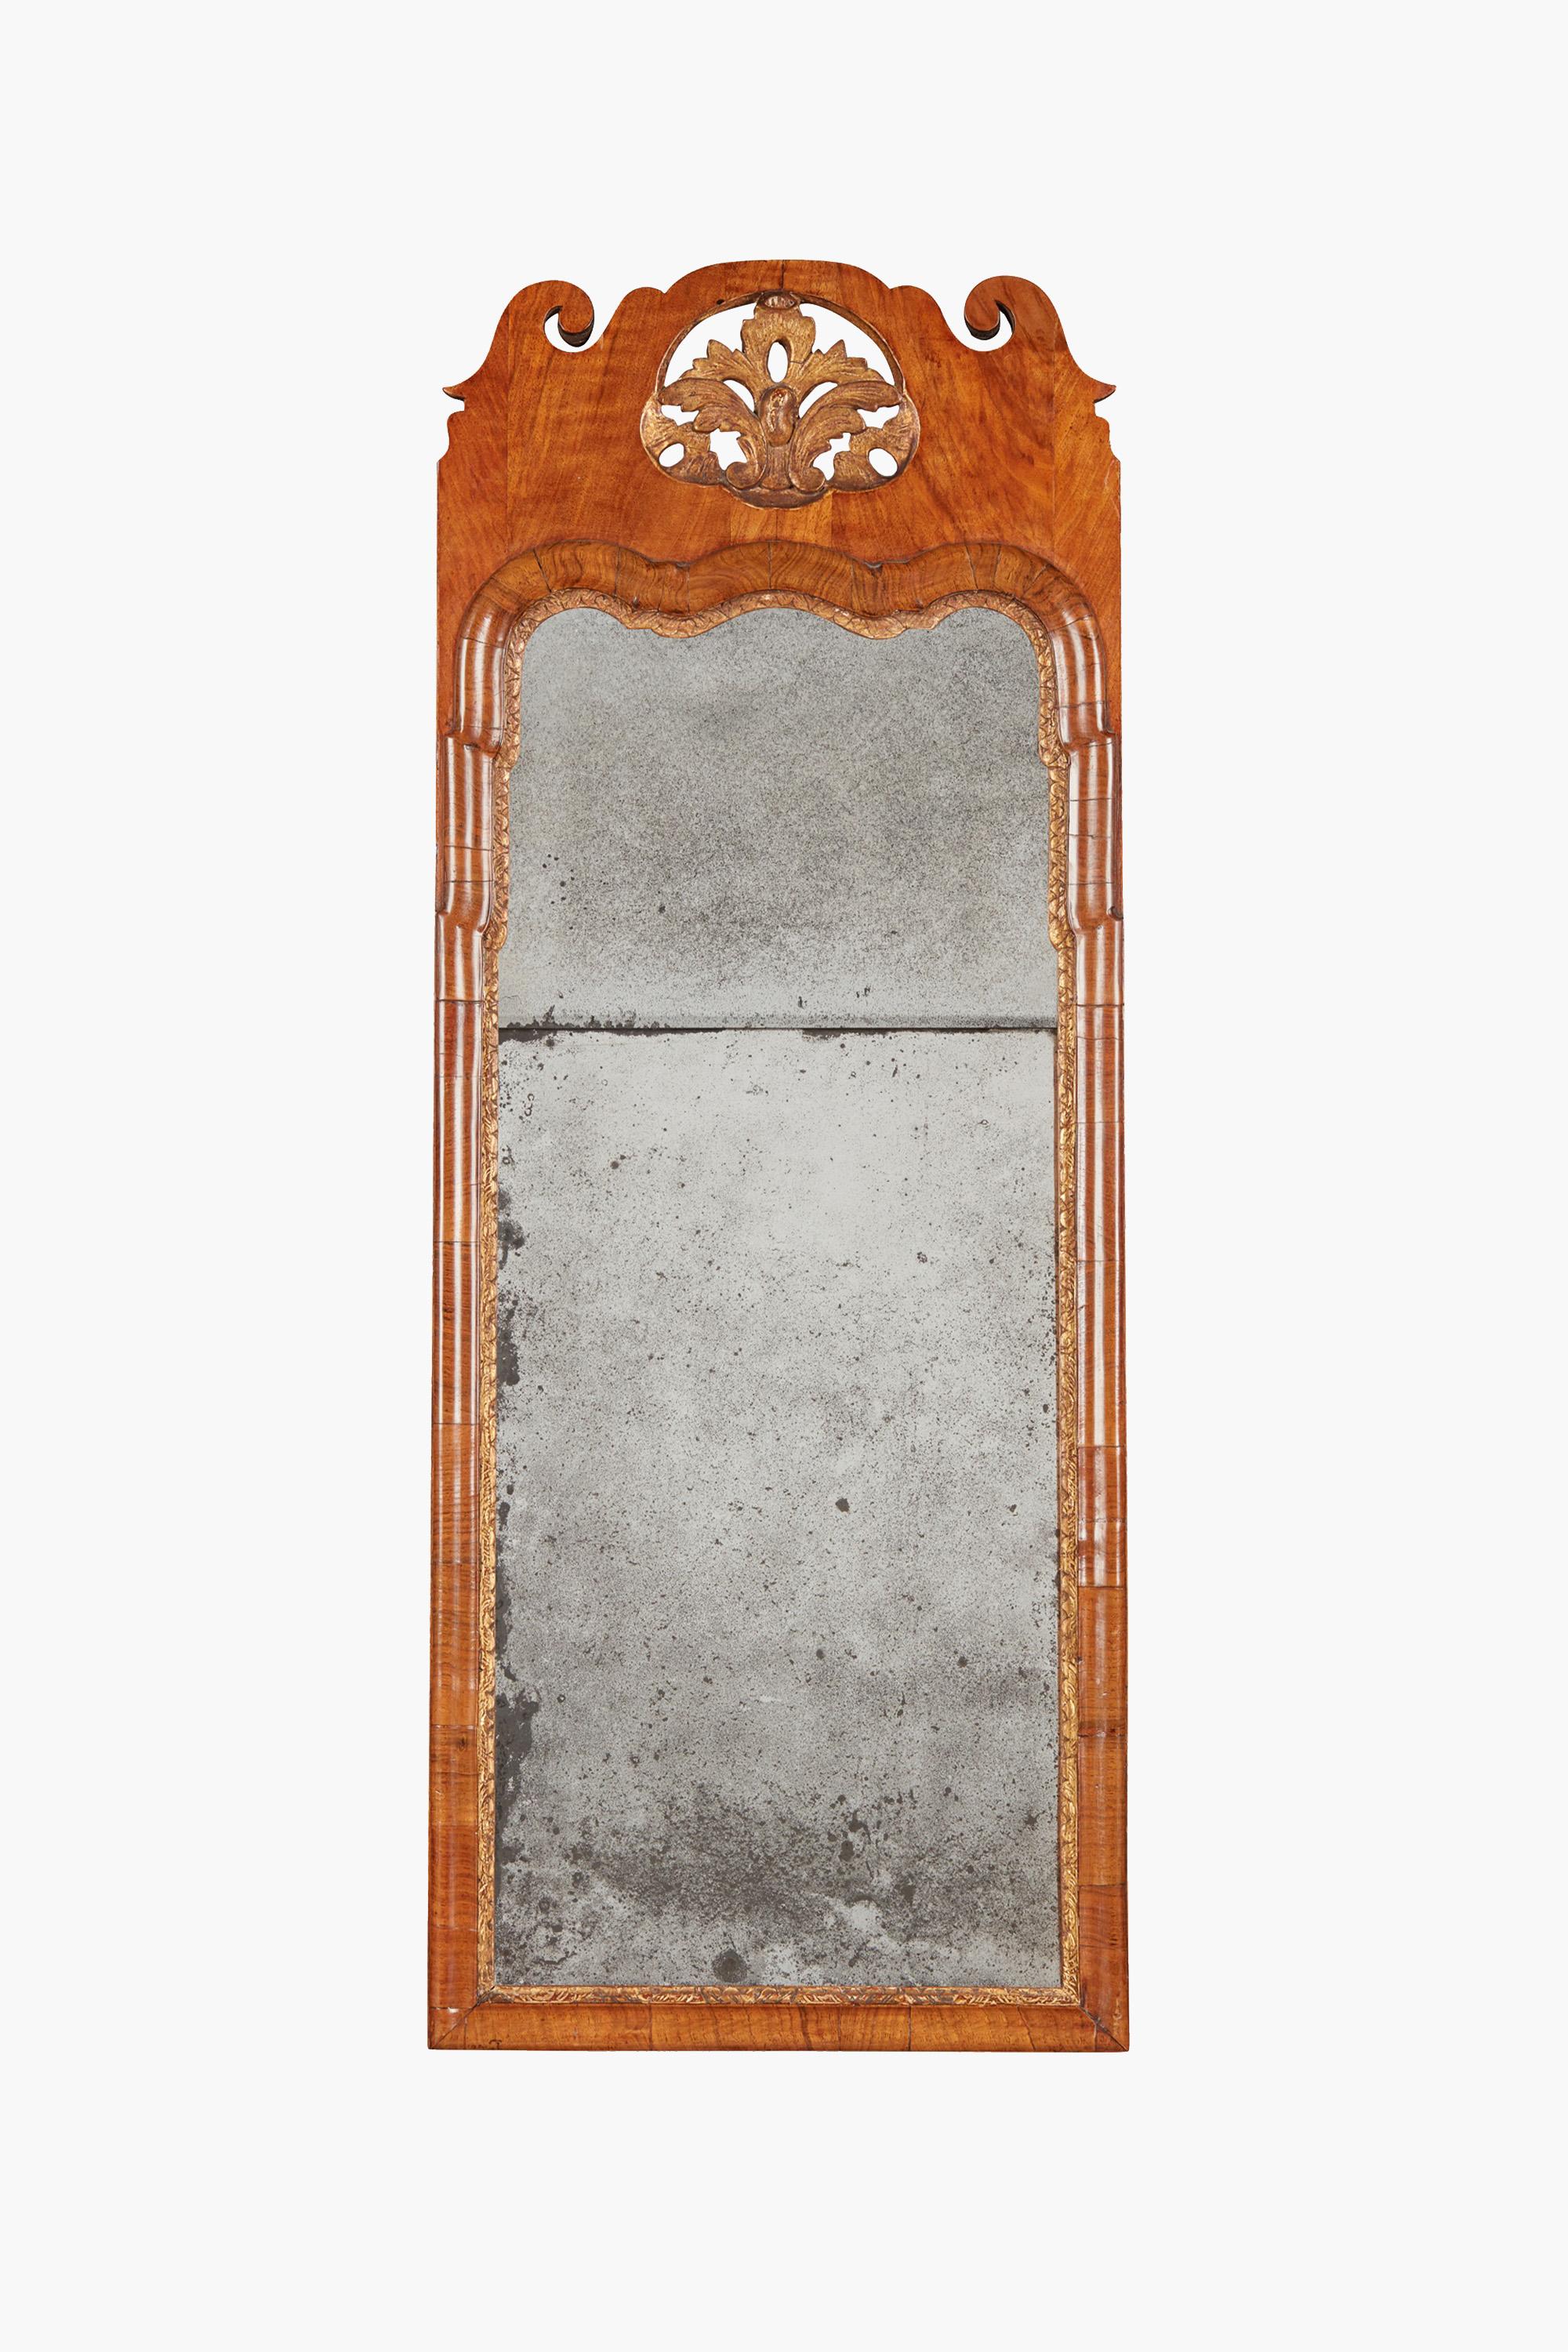 George I walnut and Parcel-gilt mirror, early 18th century

The divided mirror plate in a moulded frame with a gilt slip and pierced and scroll carved cresting.

Dimensions: 106 x 41 cm
In lovely original condition. The mirror plate is original